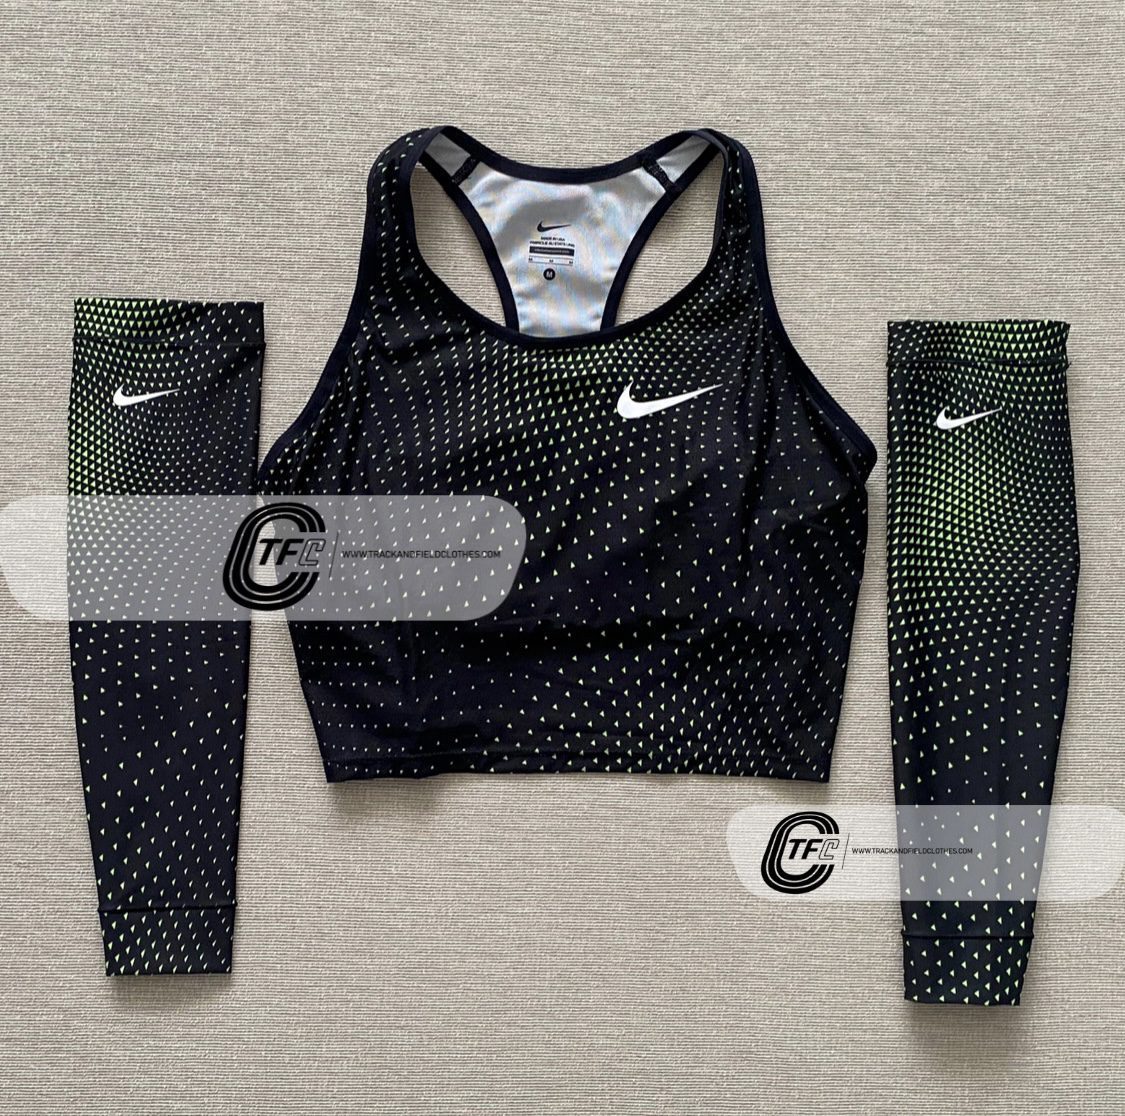 Nike 2018 Pro Elite Team W Competition Kit | Trackandfieldclothes